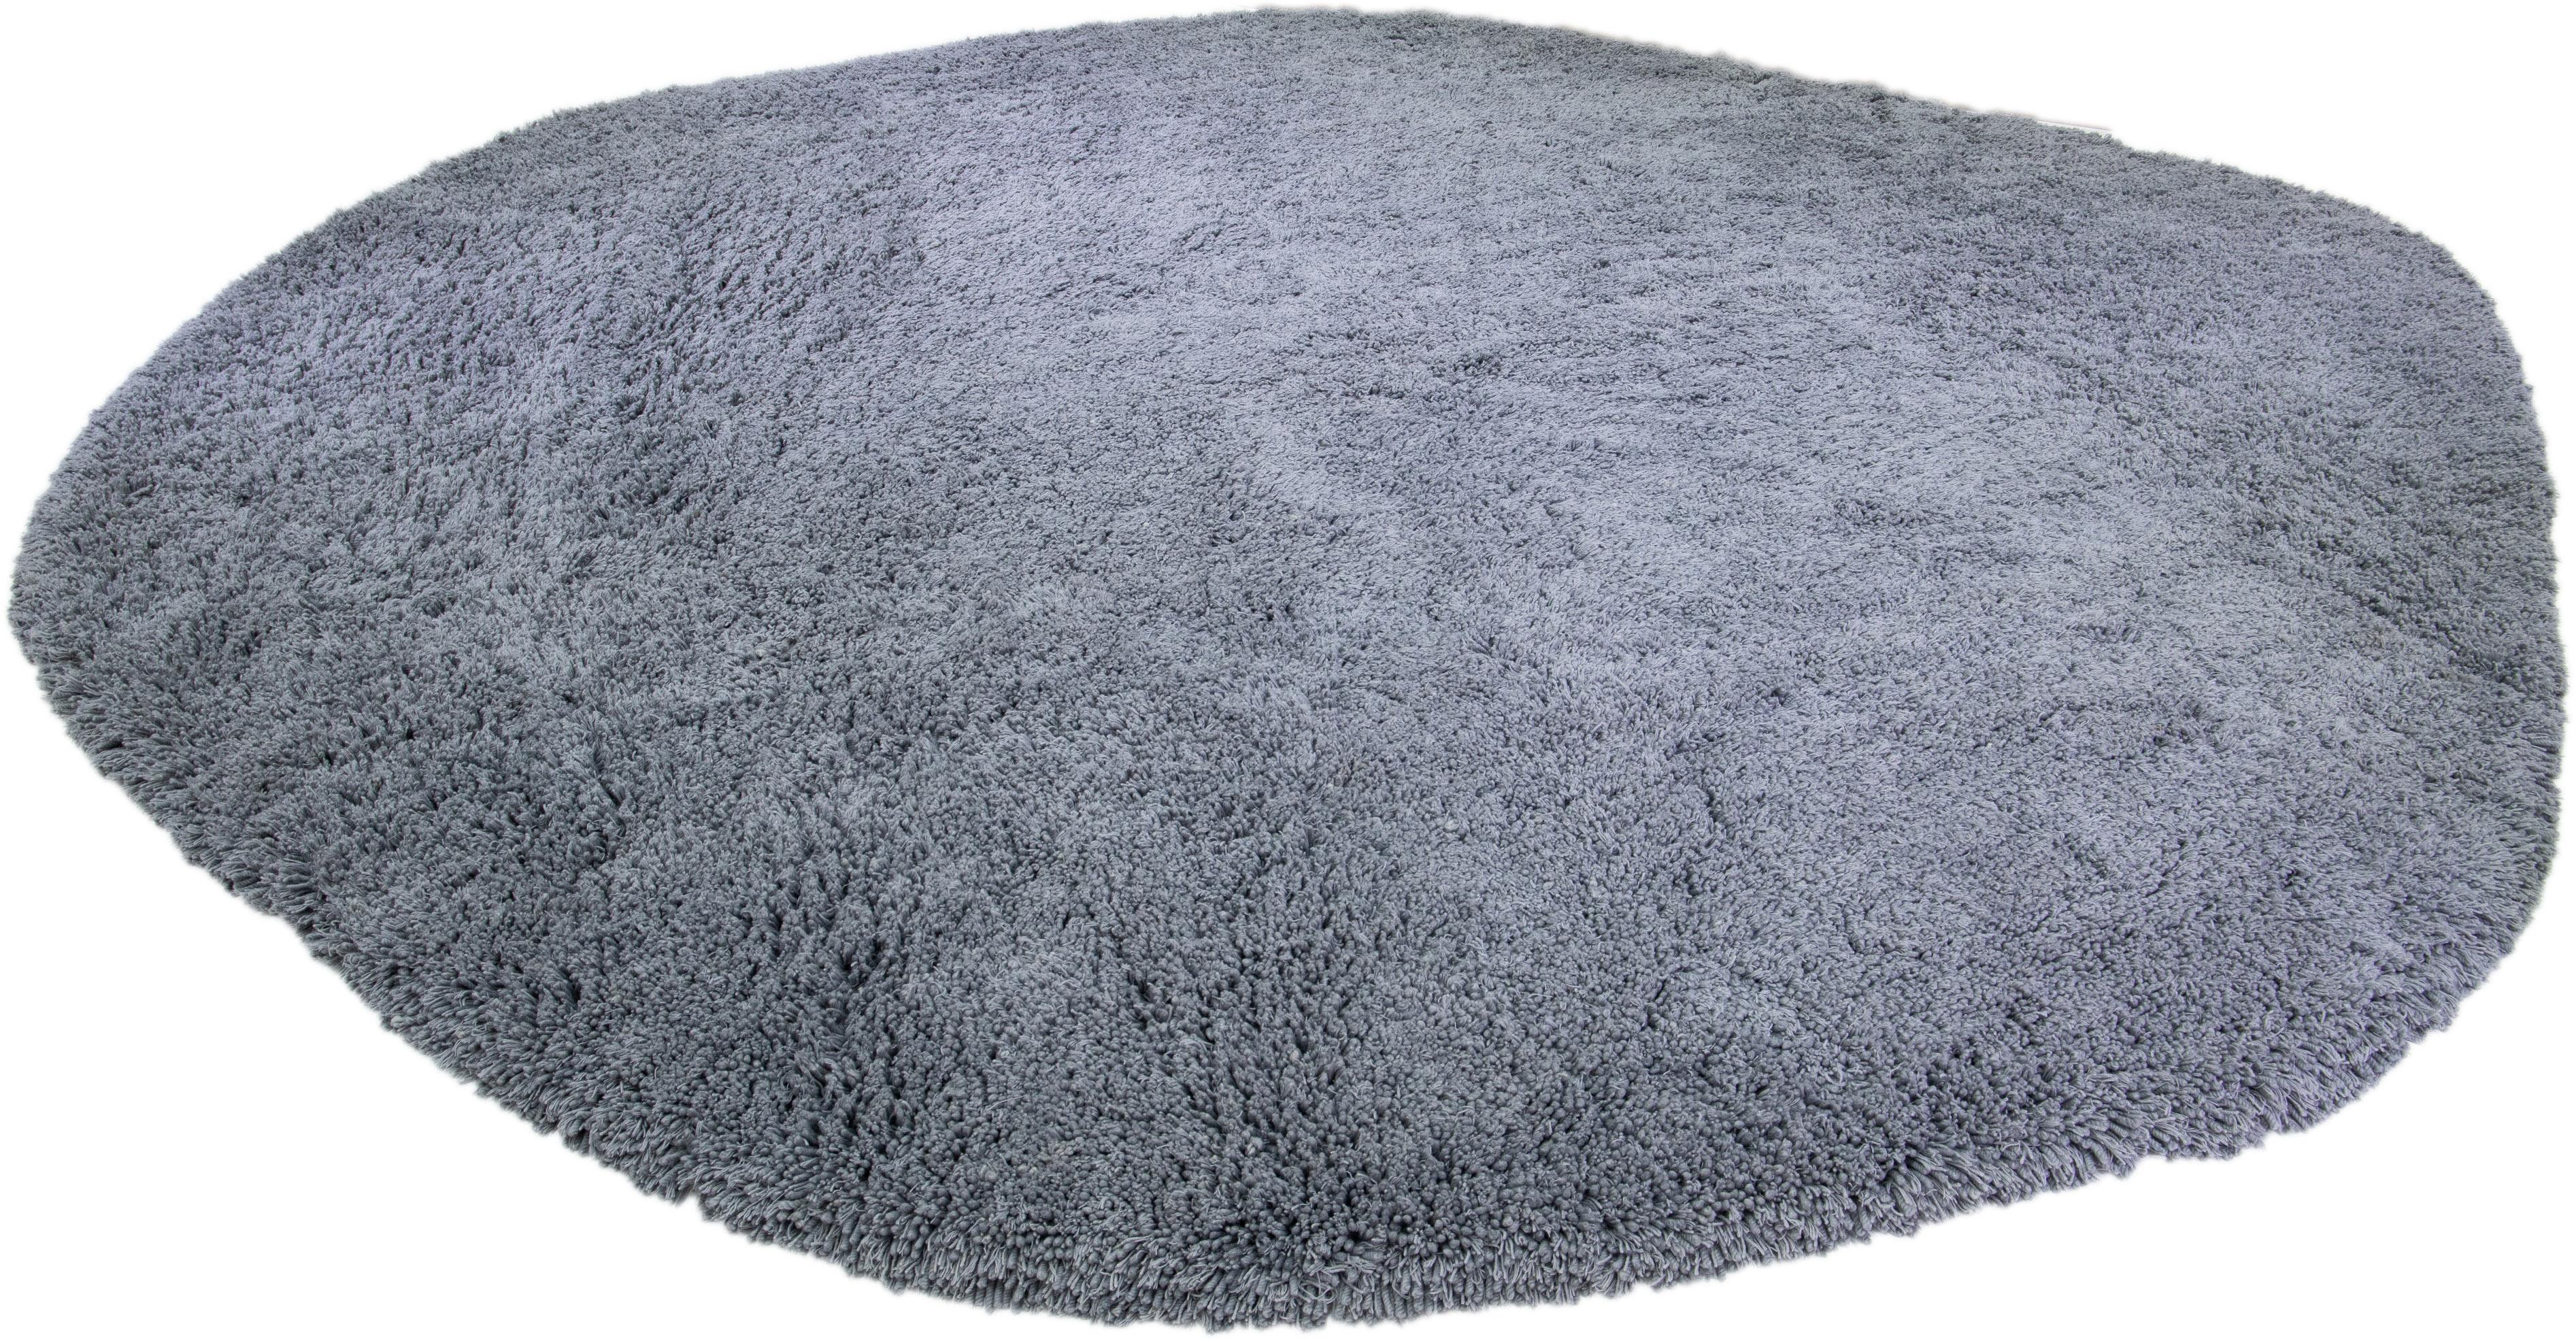 Soft and luxurious, this modern wool oval area rug is sure to transform your space! It boasts a solid grey field and textured pattern, creating a contemporary feel.

This rug measures: 19' x 19'.

